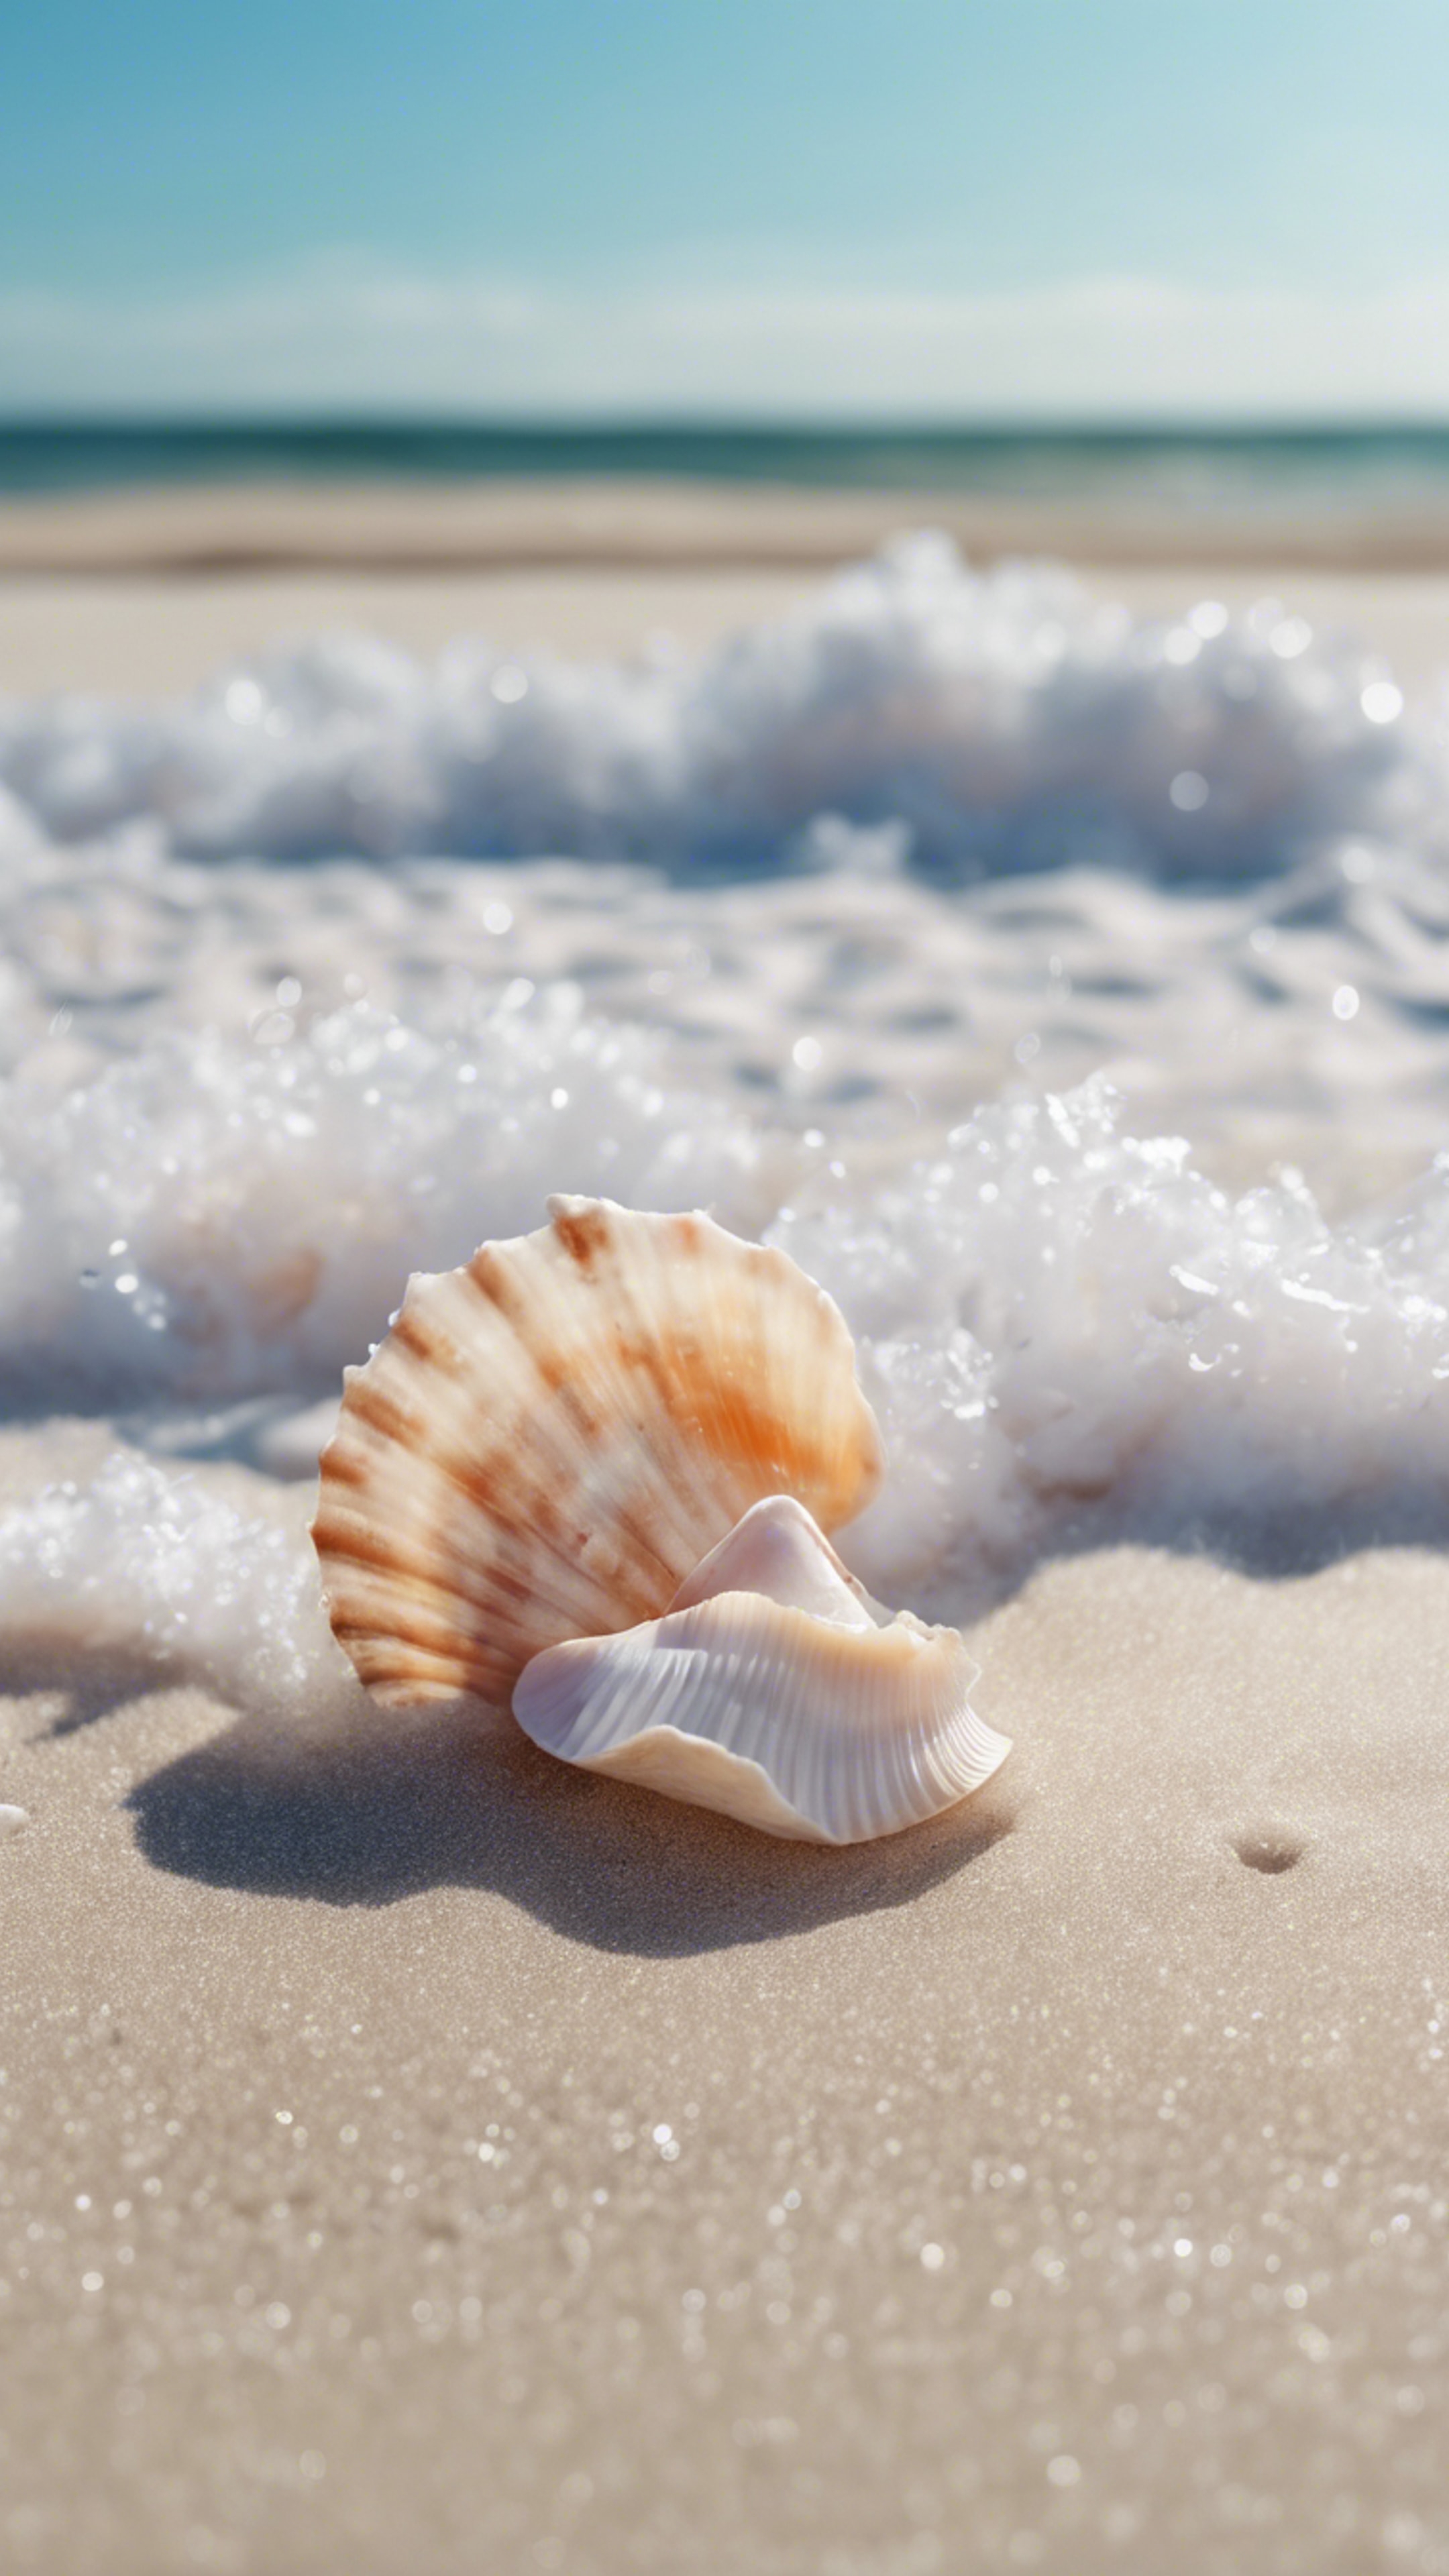 A wave washing ashore under a pastel blue sky, seashells scattered in white sand. Wallpaper[00bc1dd8280e4c80977e]